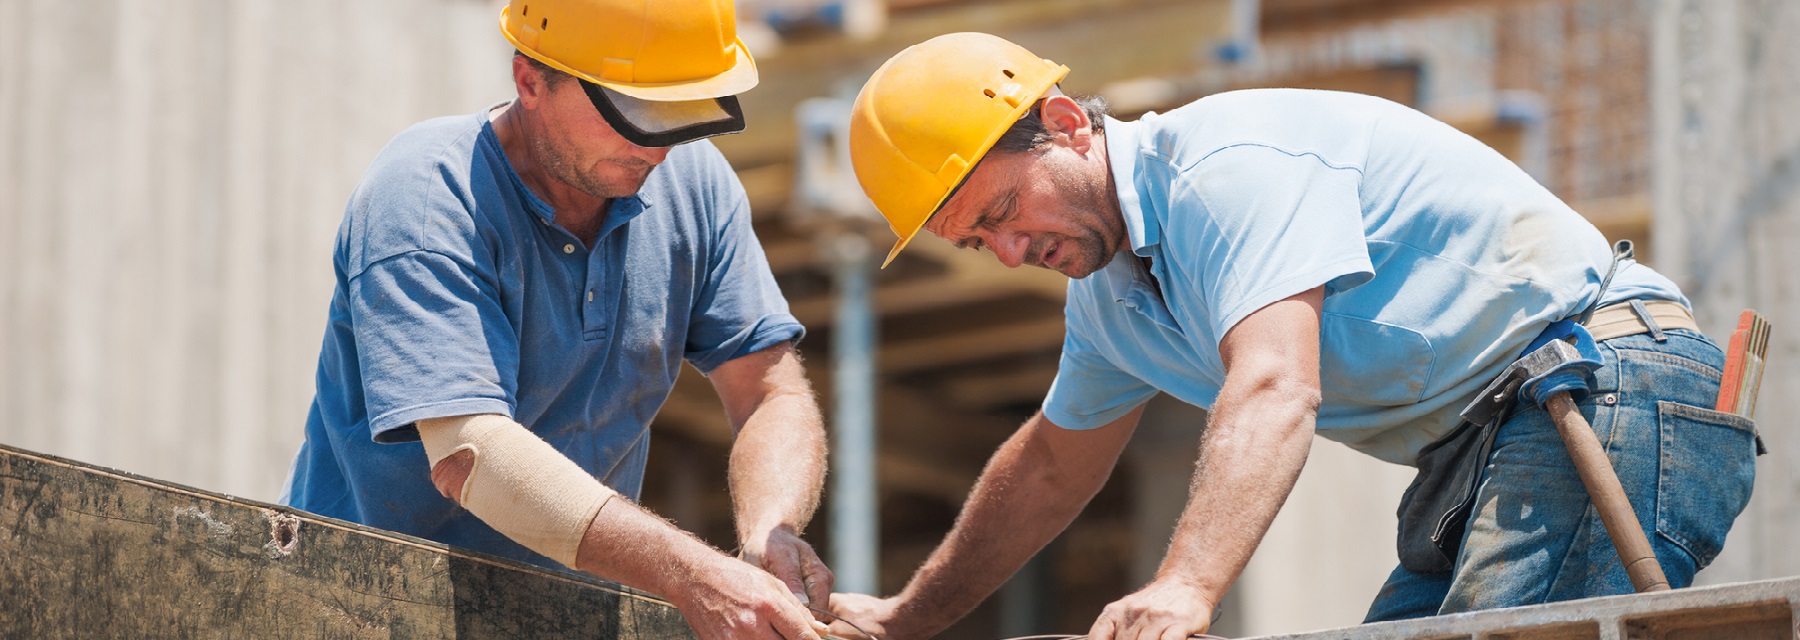 Workers for construction insurance